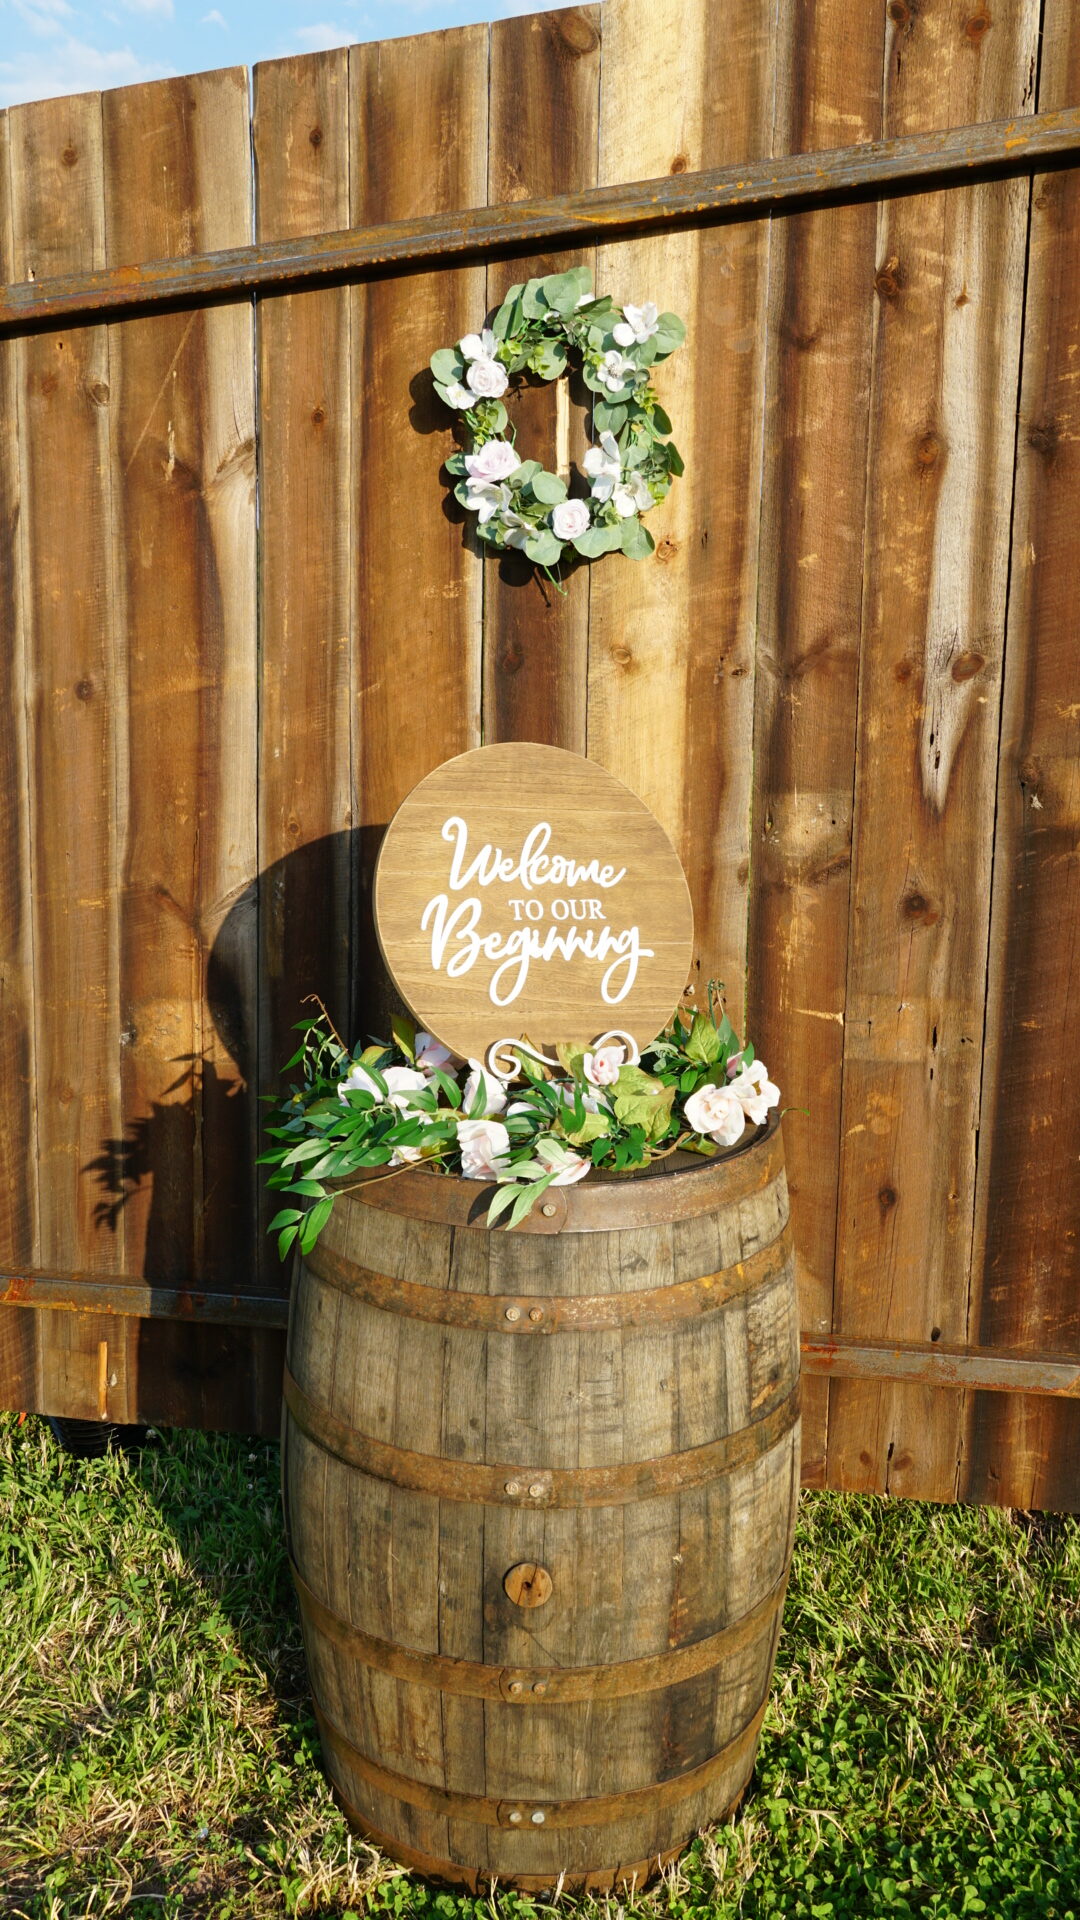 A wooden barrel with flowers on top of it.